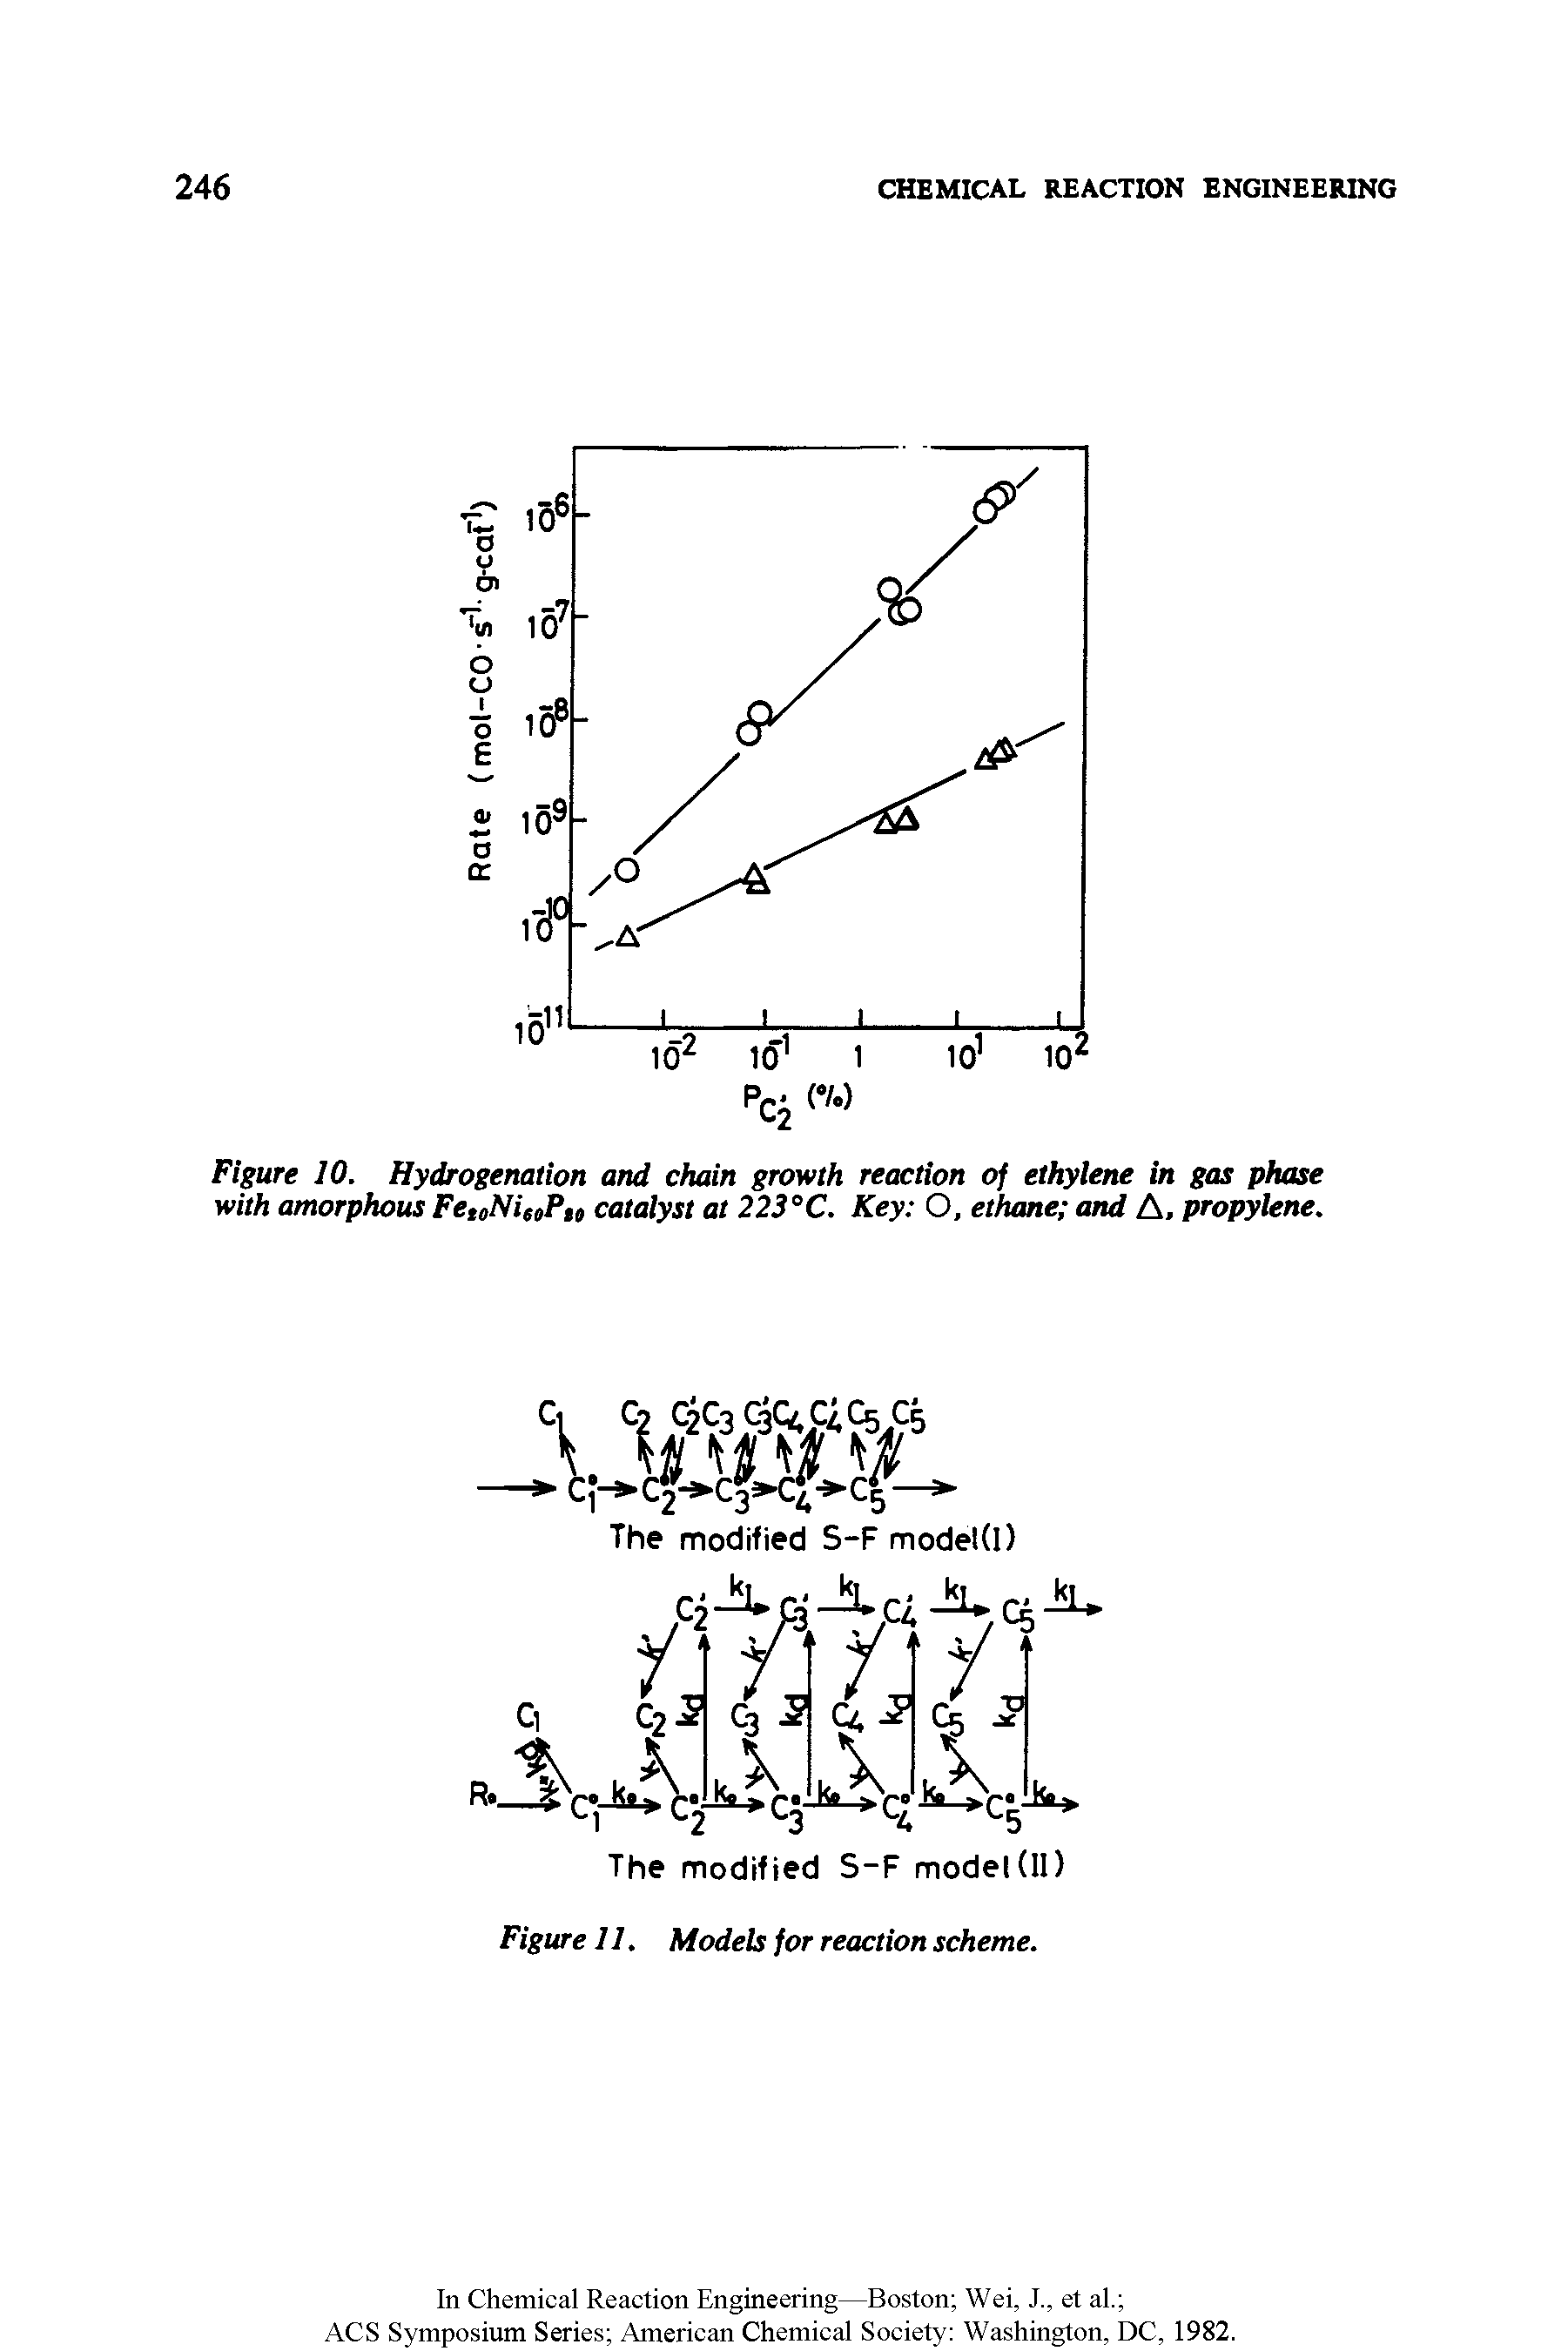 Figure 10. Hydrogenation and chain growth reaction of ethylene in gas phase with amorphous FetoNieoPio catalyst at 223°C. Key O, ethane and A, propylene.